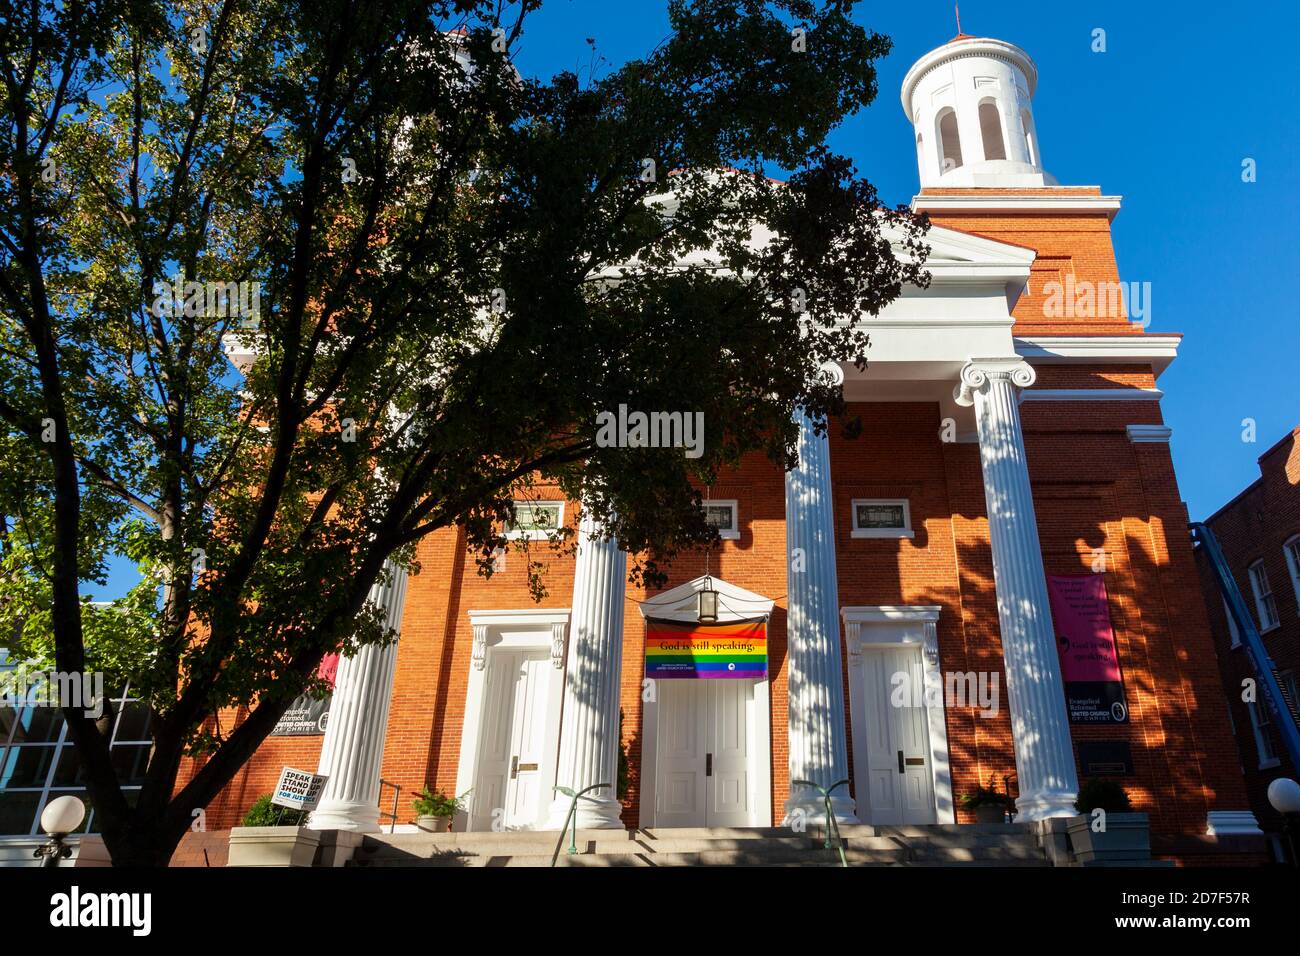 Frederick, MD, USA 10/14/2020: Historical building of Evangelical Reformed United Church of Christ in old Frederick. The brick building with white col Stock Photo